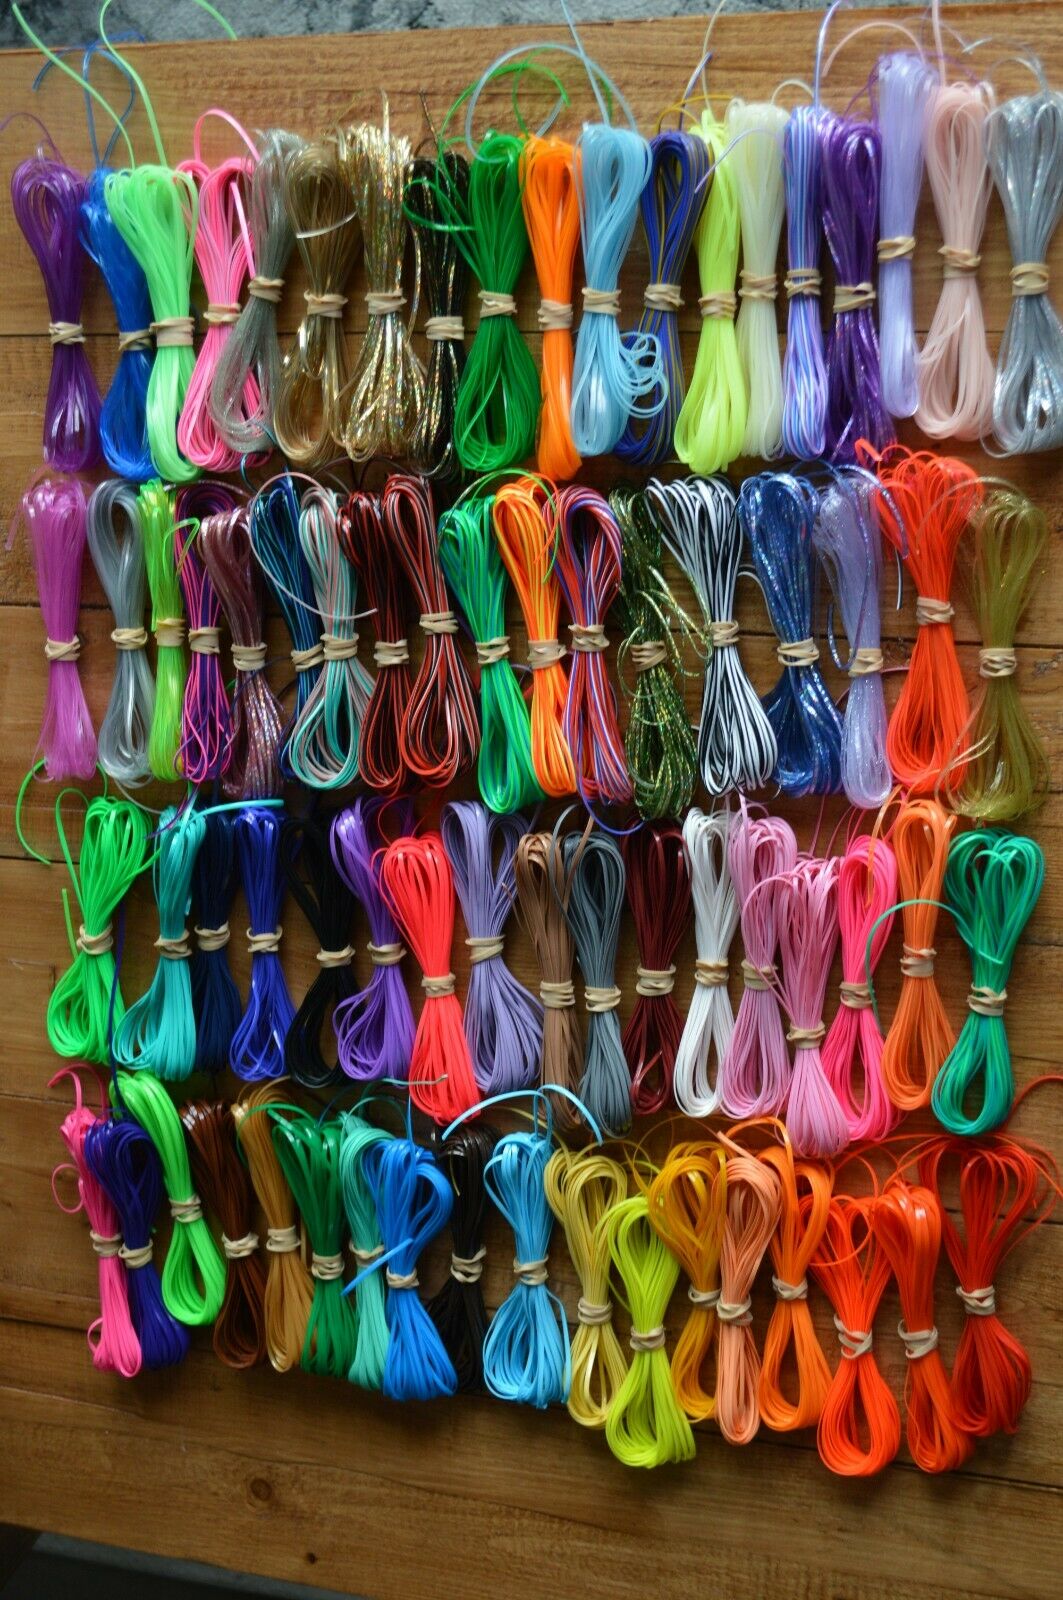 10 Yards Your Choice Colors Rexlace Lacing Boondoggle Plastic Lace String